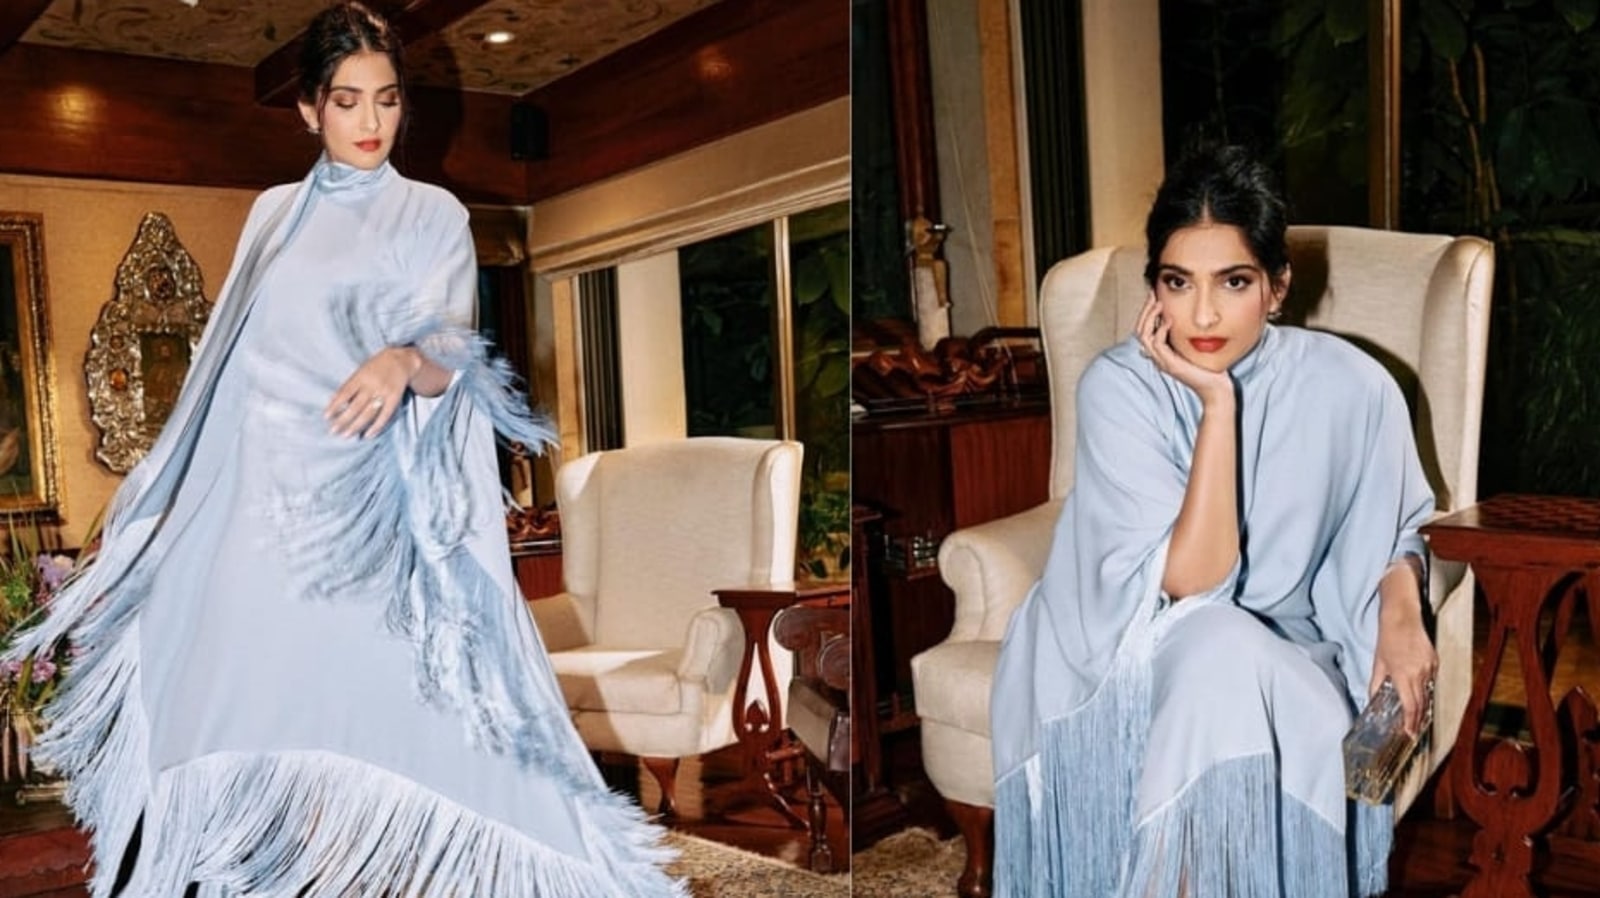 Sonam Kapoor on her Cannes Wardrobe and Promoting Indian Designers